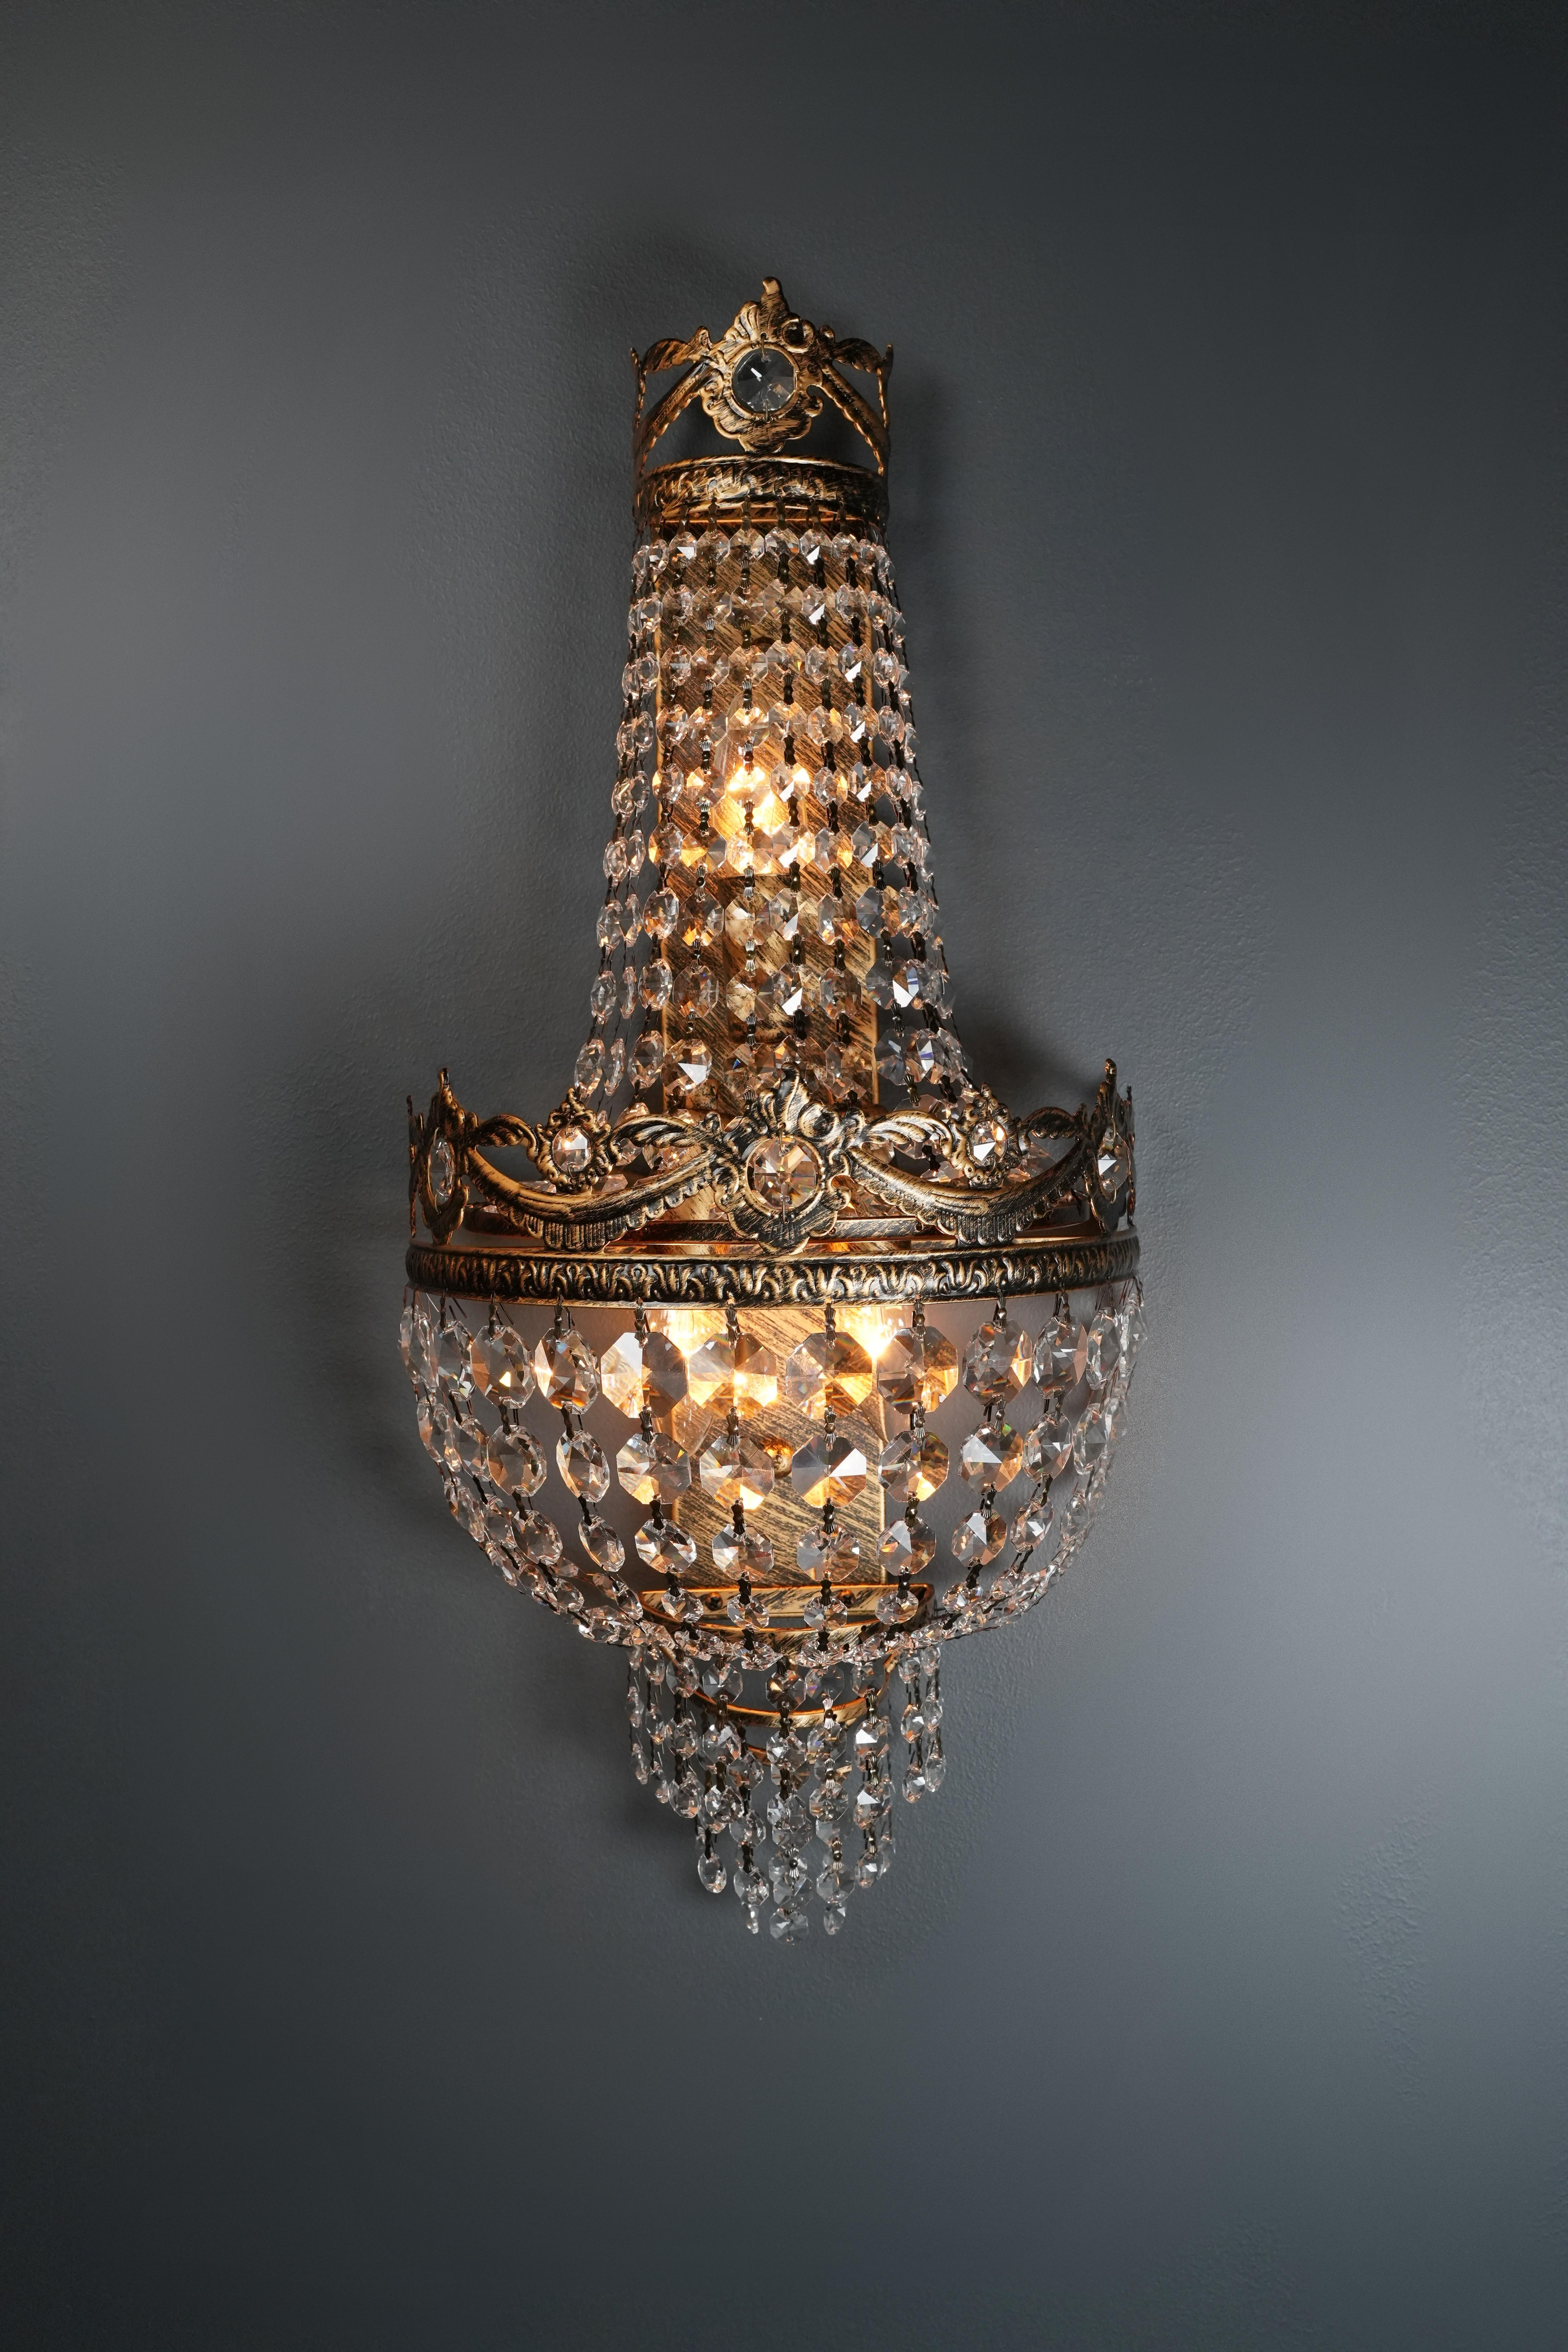 Baroque Antique Style Wall Lamp Art Deco Art Nouveau Classic Decoration With Crystals For Sale